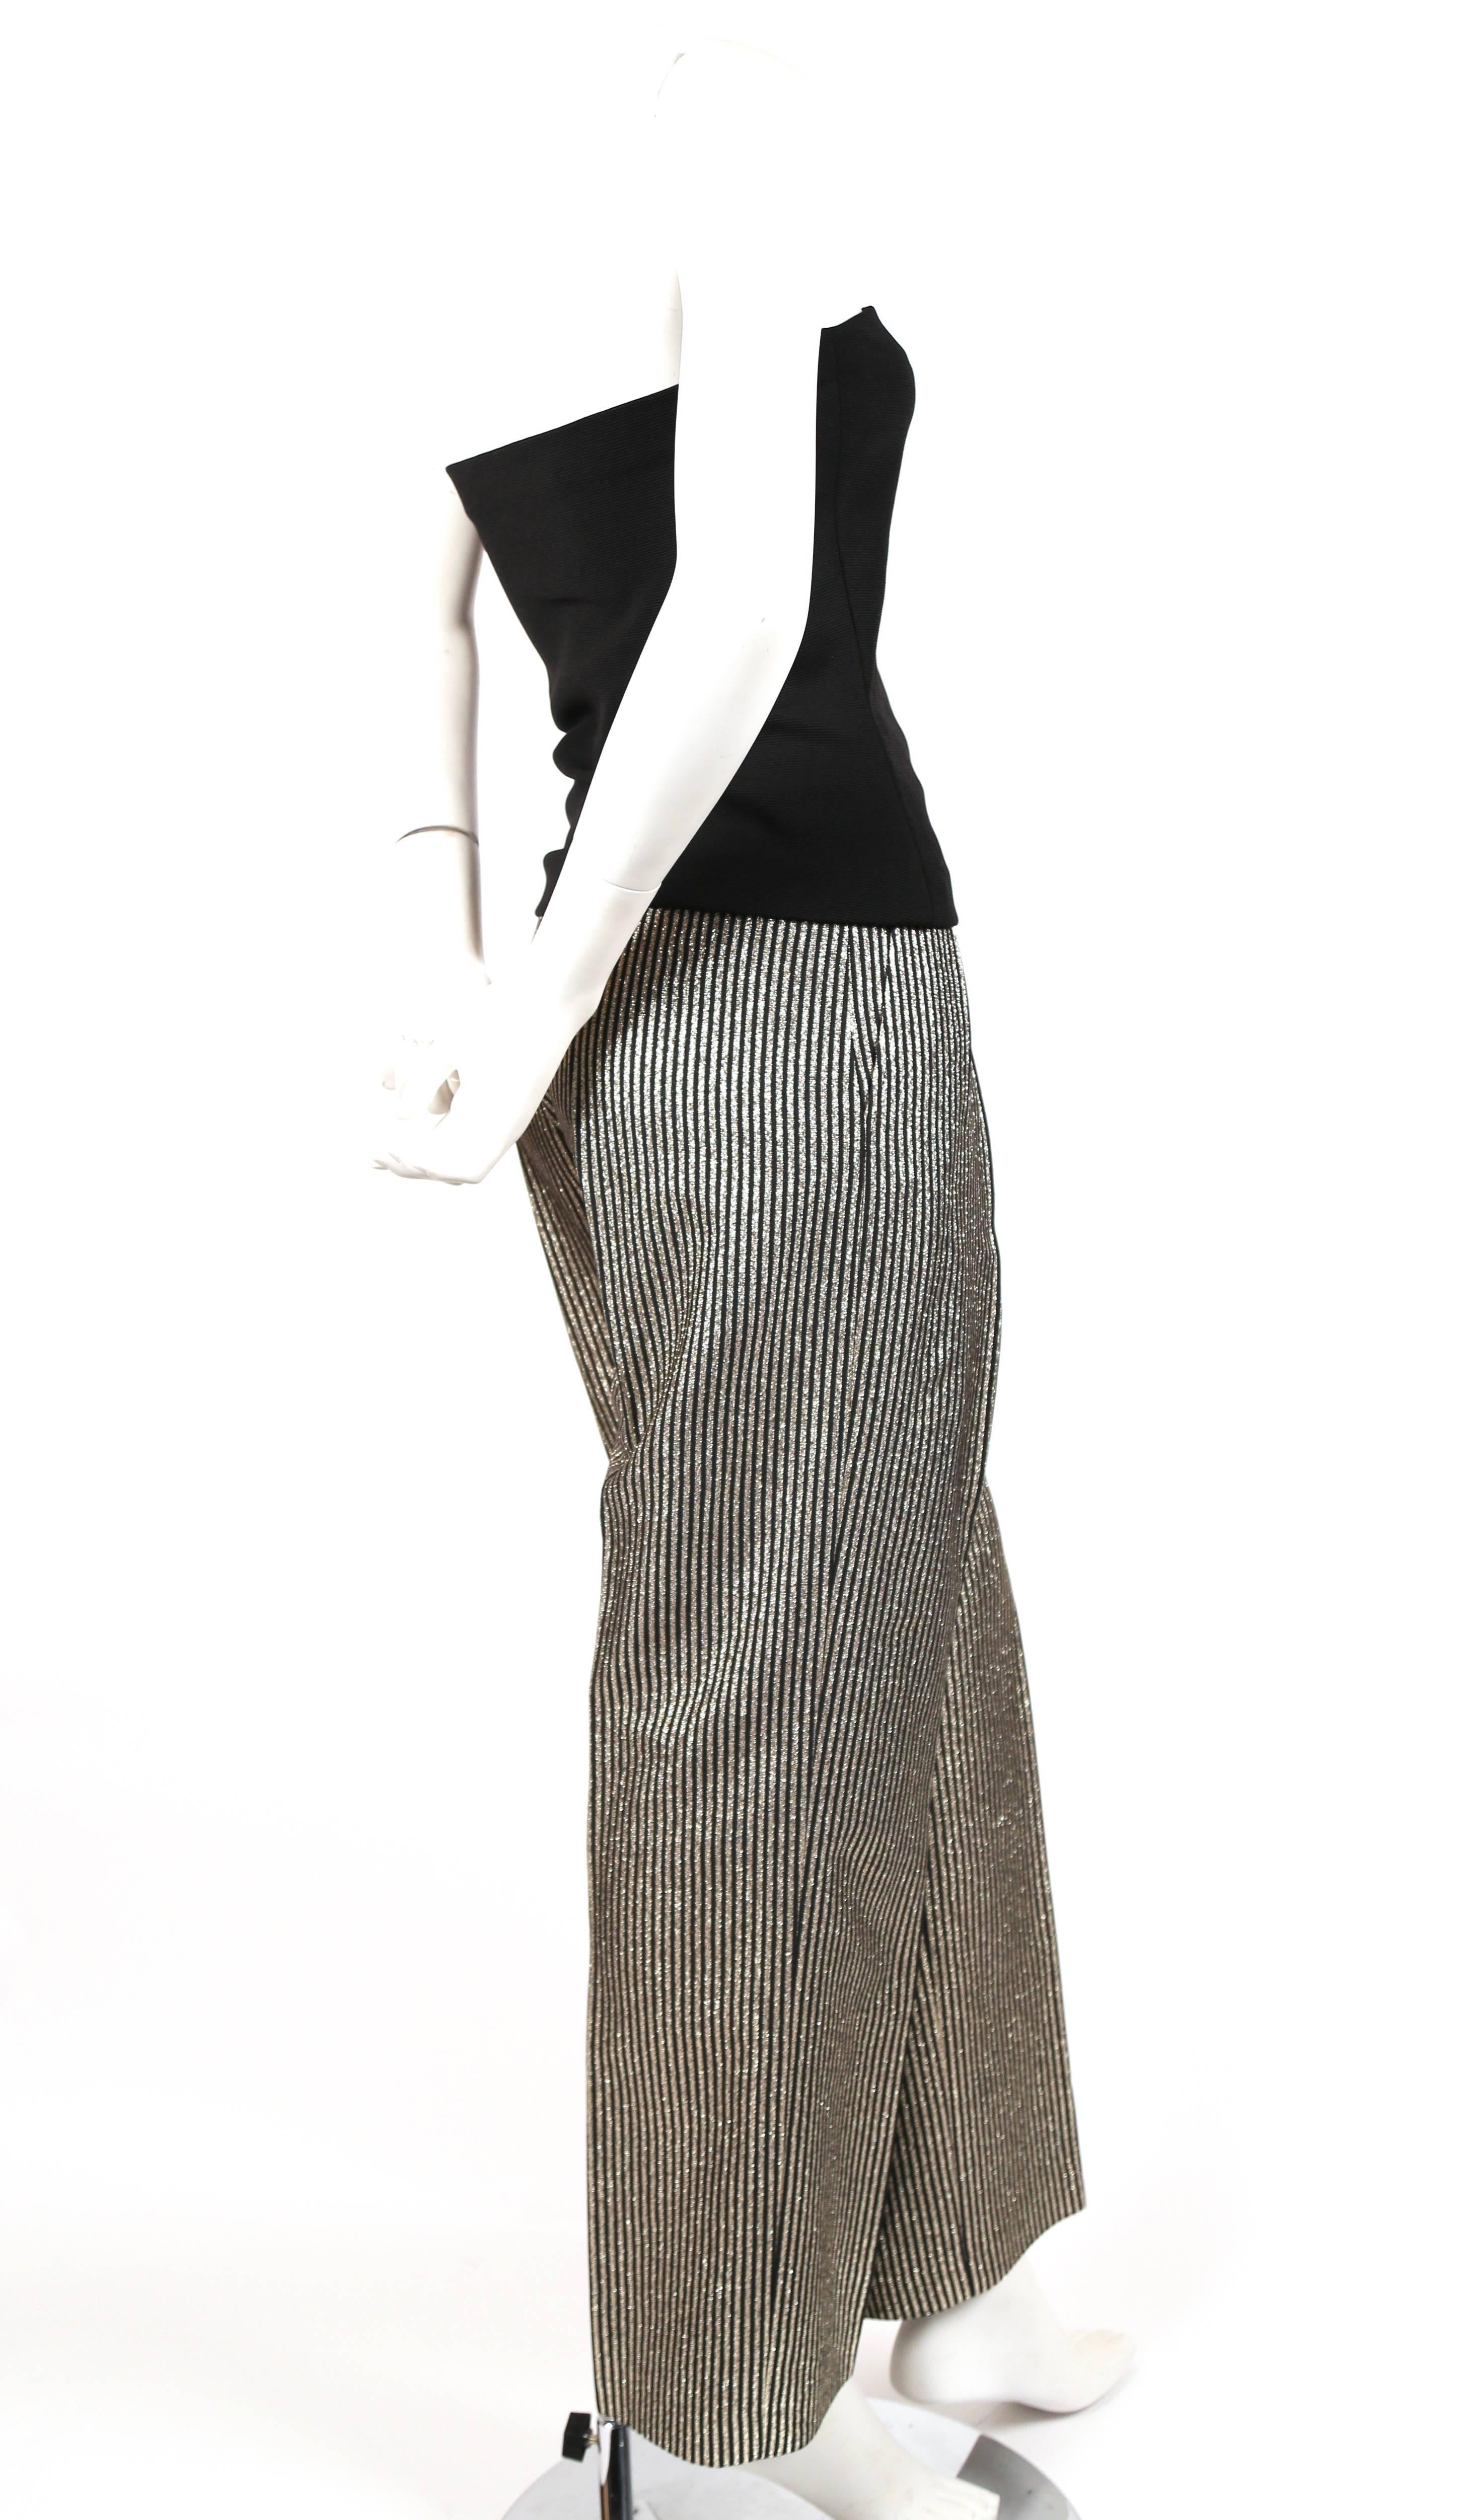 Black strapless top with black and metallic gold wide leg pants from Yves Saint Laurent dating to the late 1970's. Top is labels a French size 36. Sizing is flexible with the top. Pants would best fit a 24-25